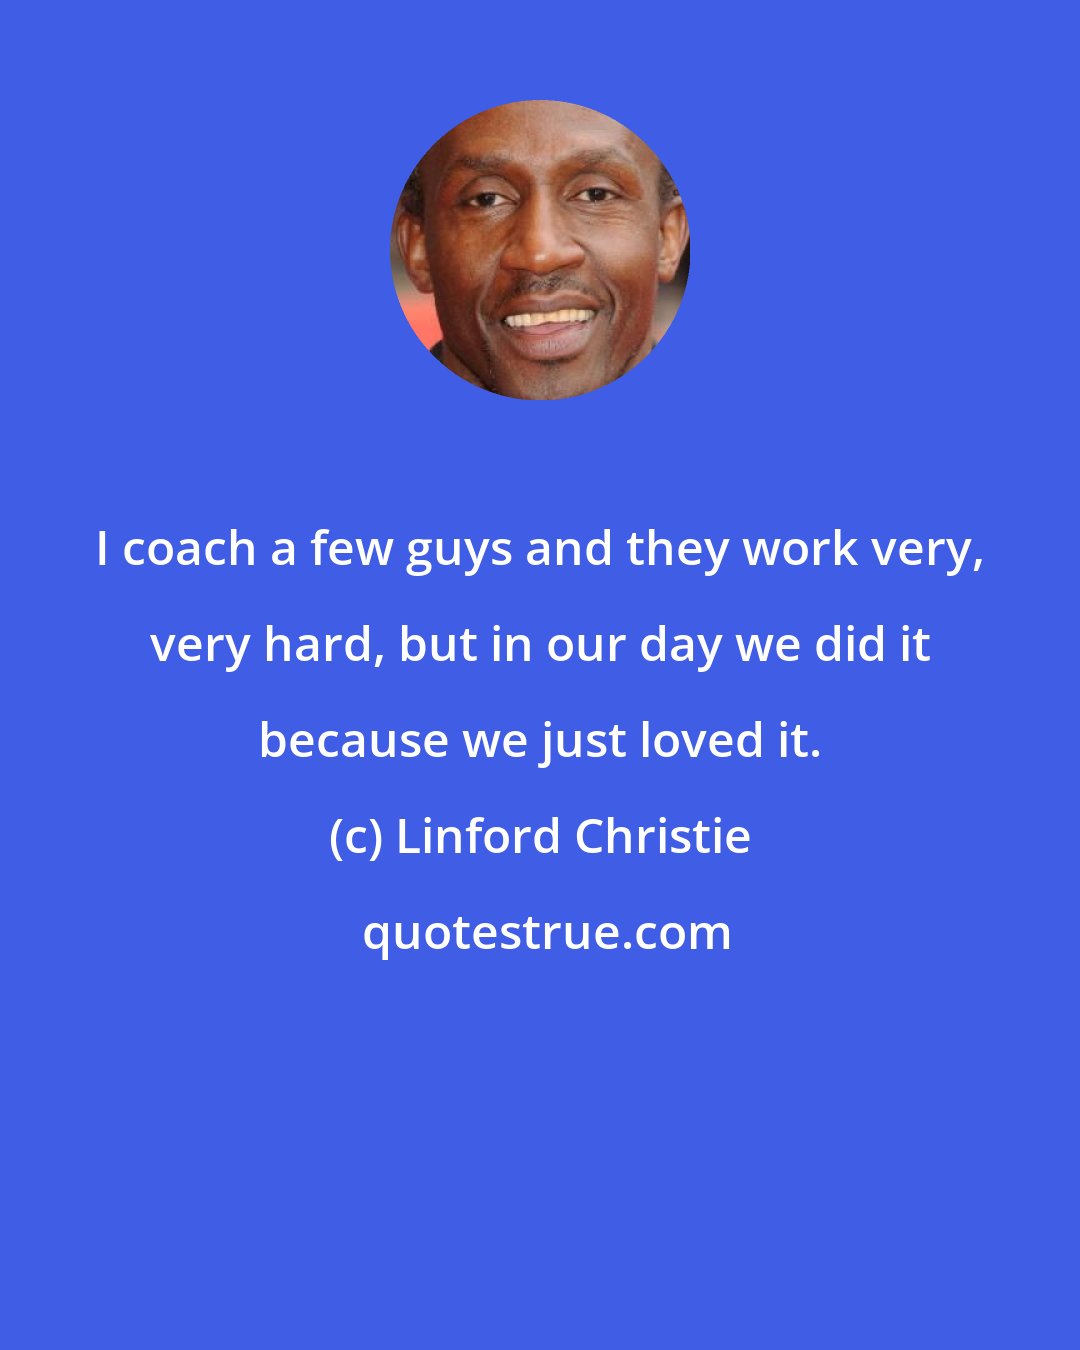 Linford Christie: I coach a few guys and they work very, very hard, but in our day we did it because we just loved it.